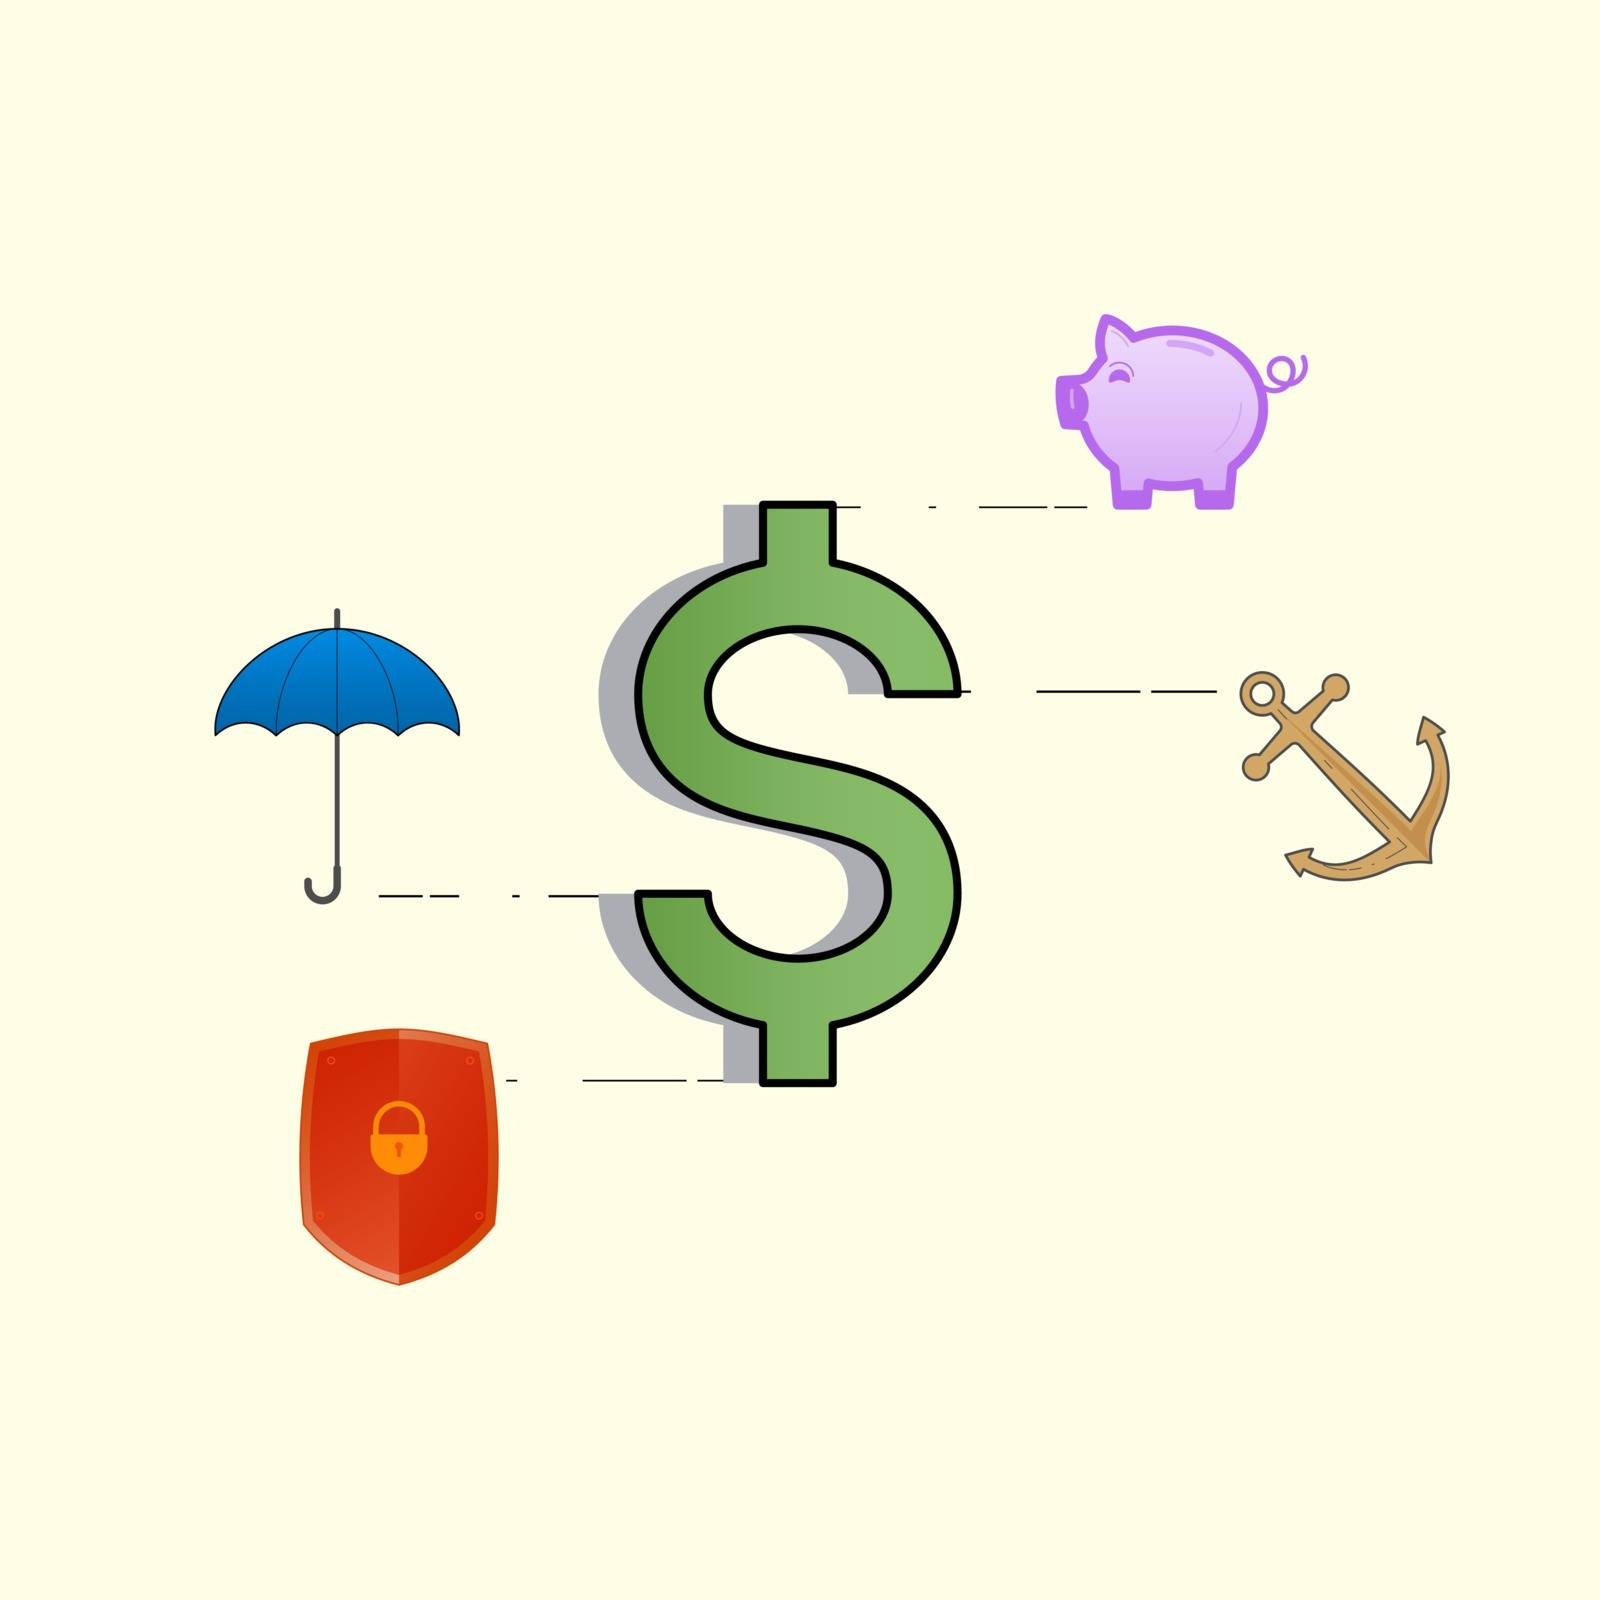 Dollar sign with umbrella, shield, piggy bank and anchor symbols. Financial management diagram: insurance, security, saving and stability. Vector illustration outline flat design style.